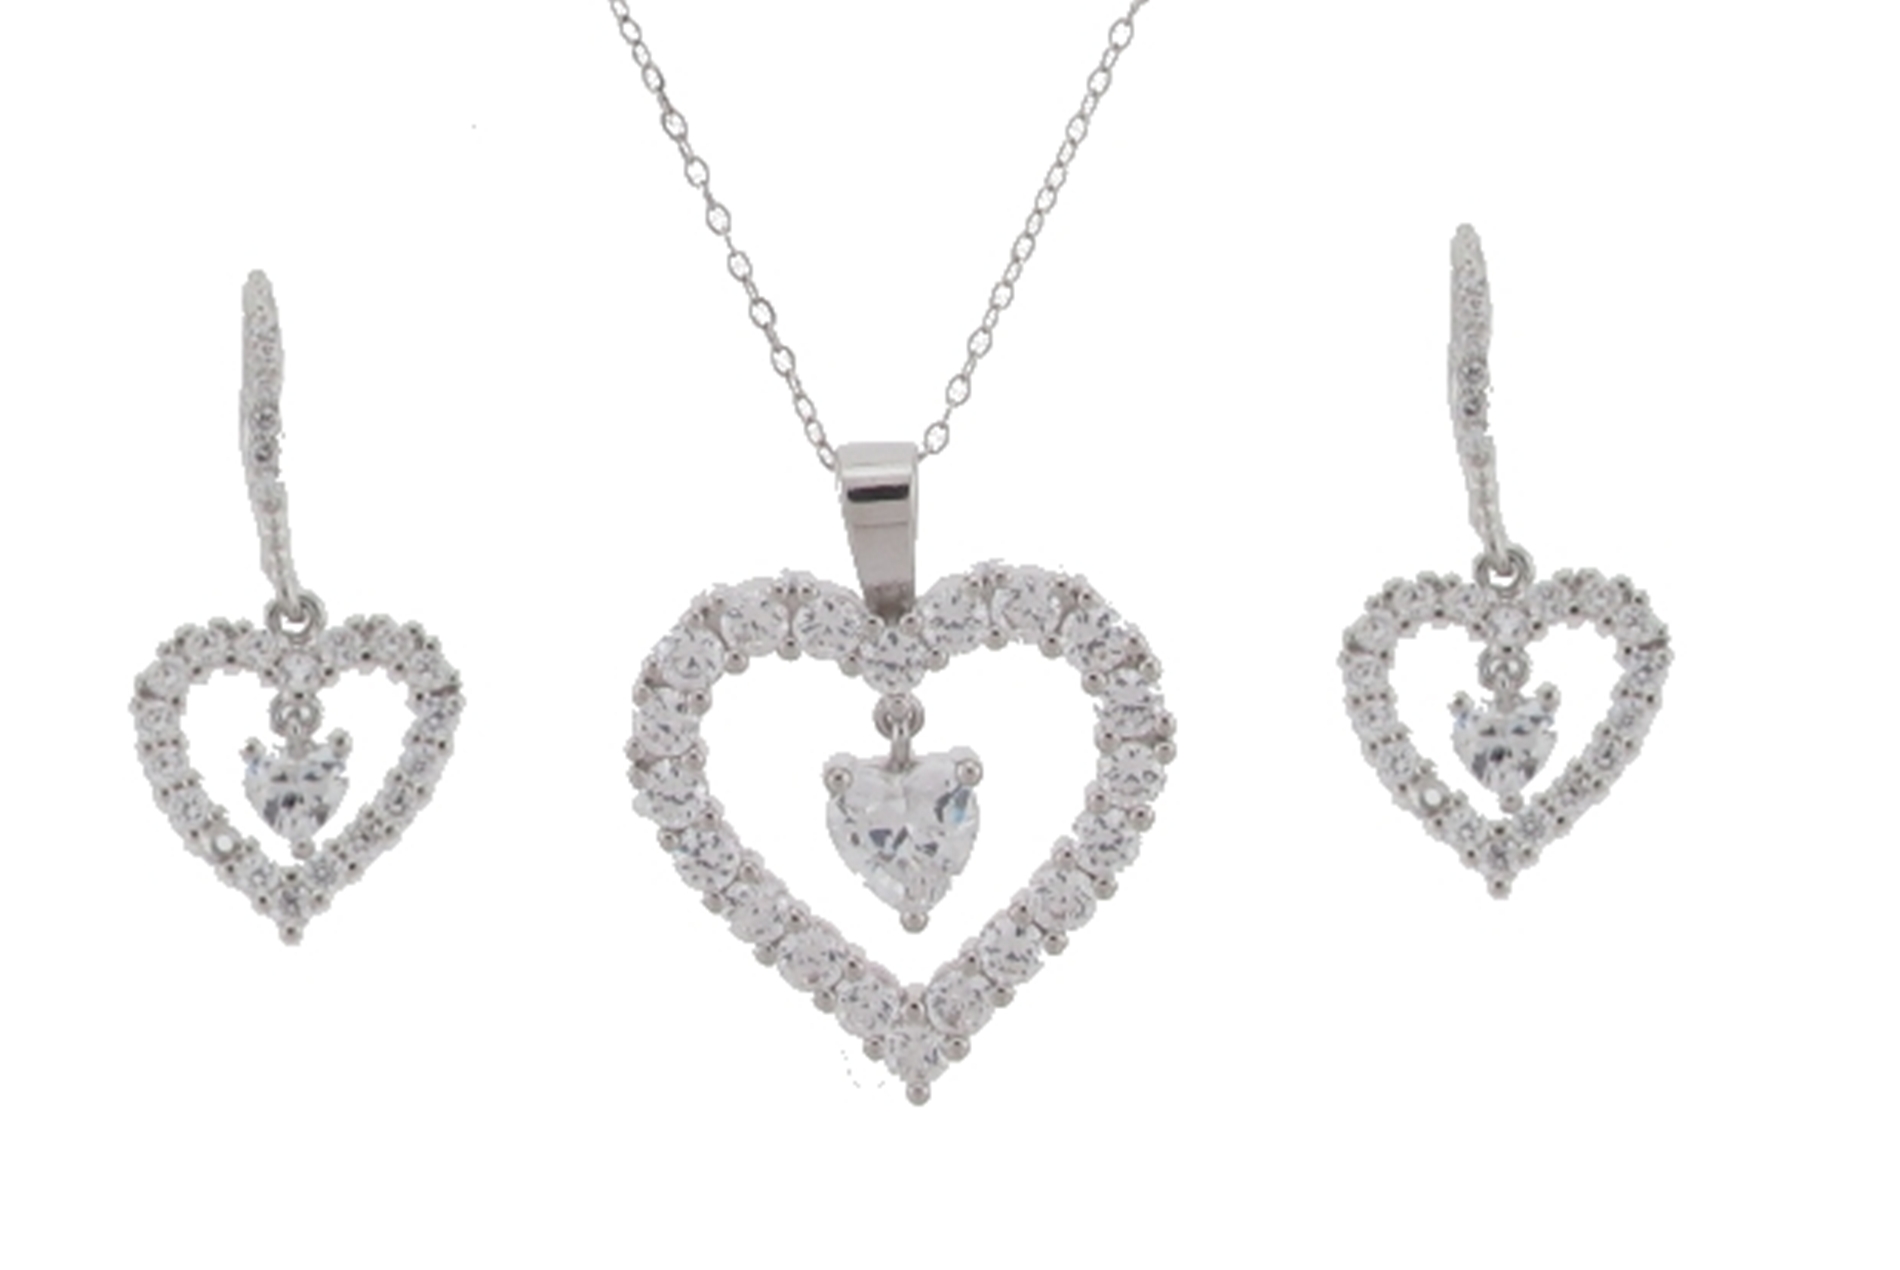 Open Heart Charm and Heart Stud Set.